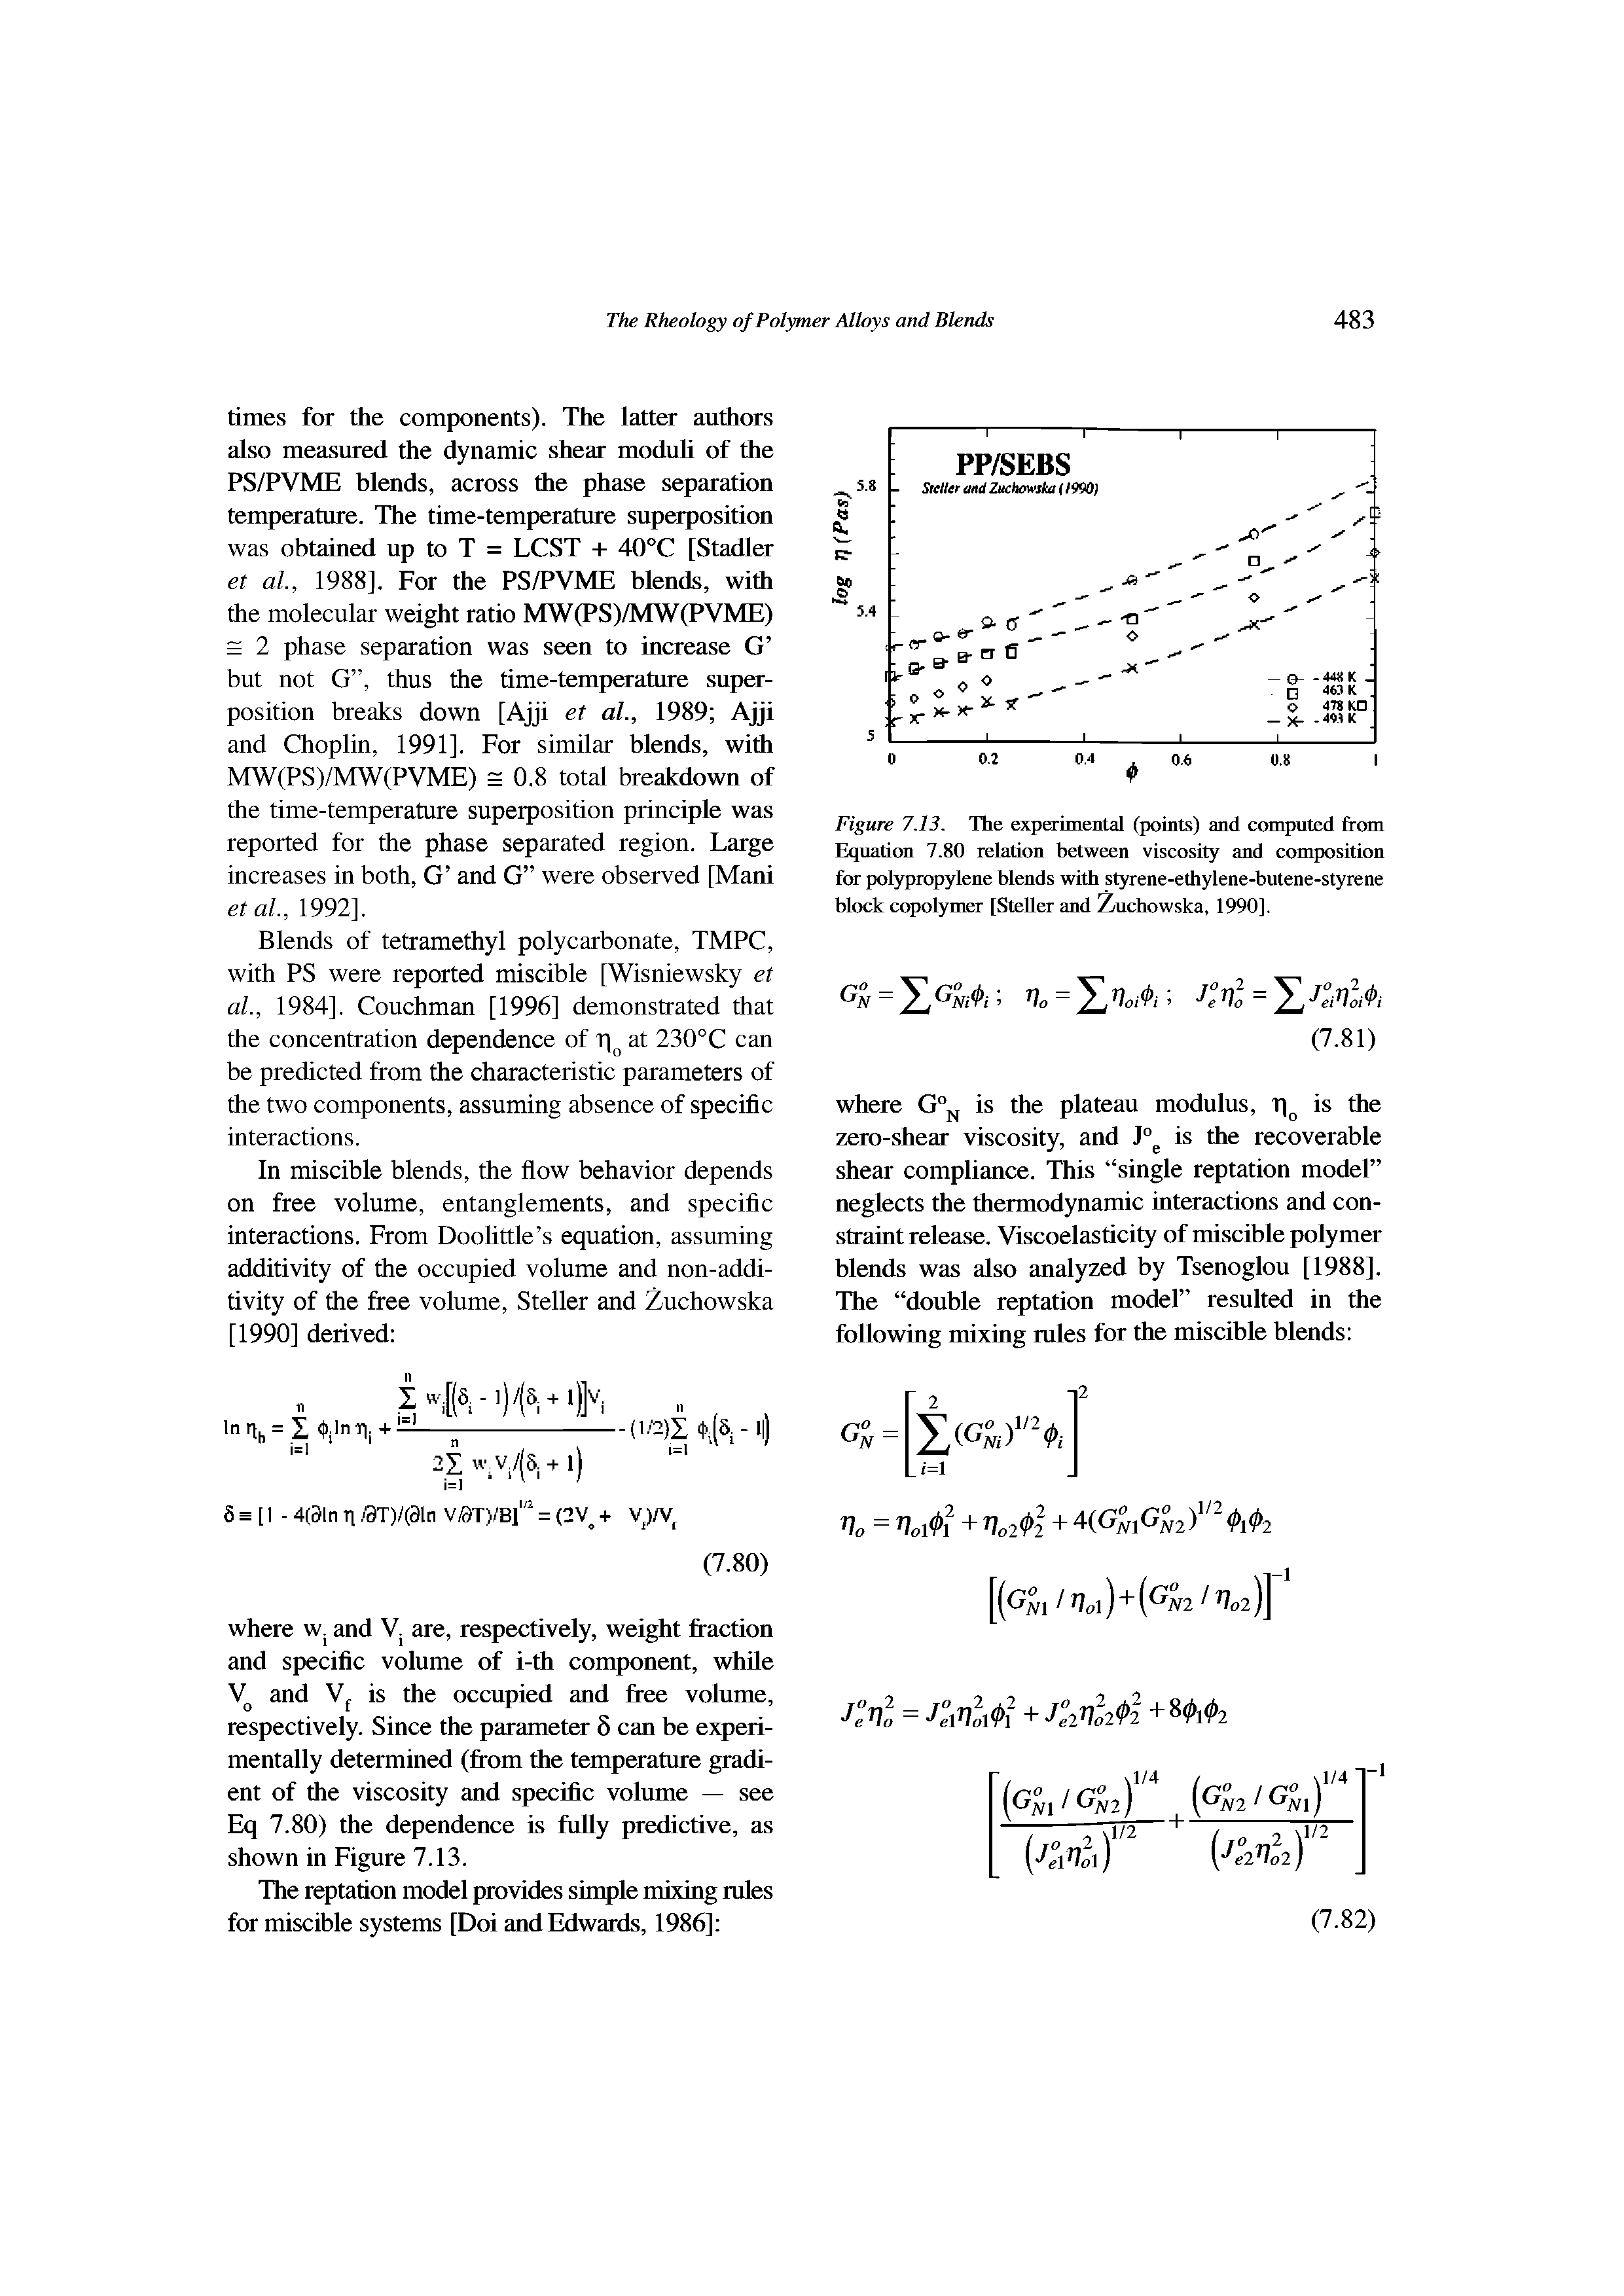 Figure 7.13. The experimental (points) and computed from Equation 7.80 relation between viscosity and composition for polypropylene blends with styrene-ethylene-butene-styrene block copolymer [Steller and Z uchowska, 1990].